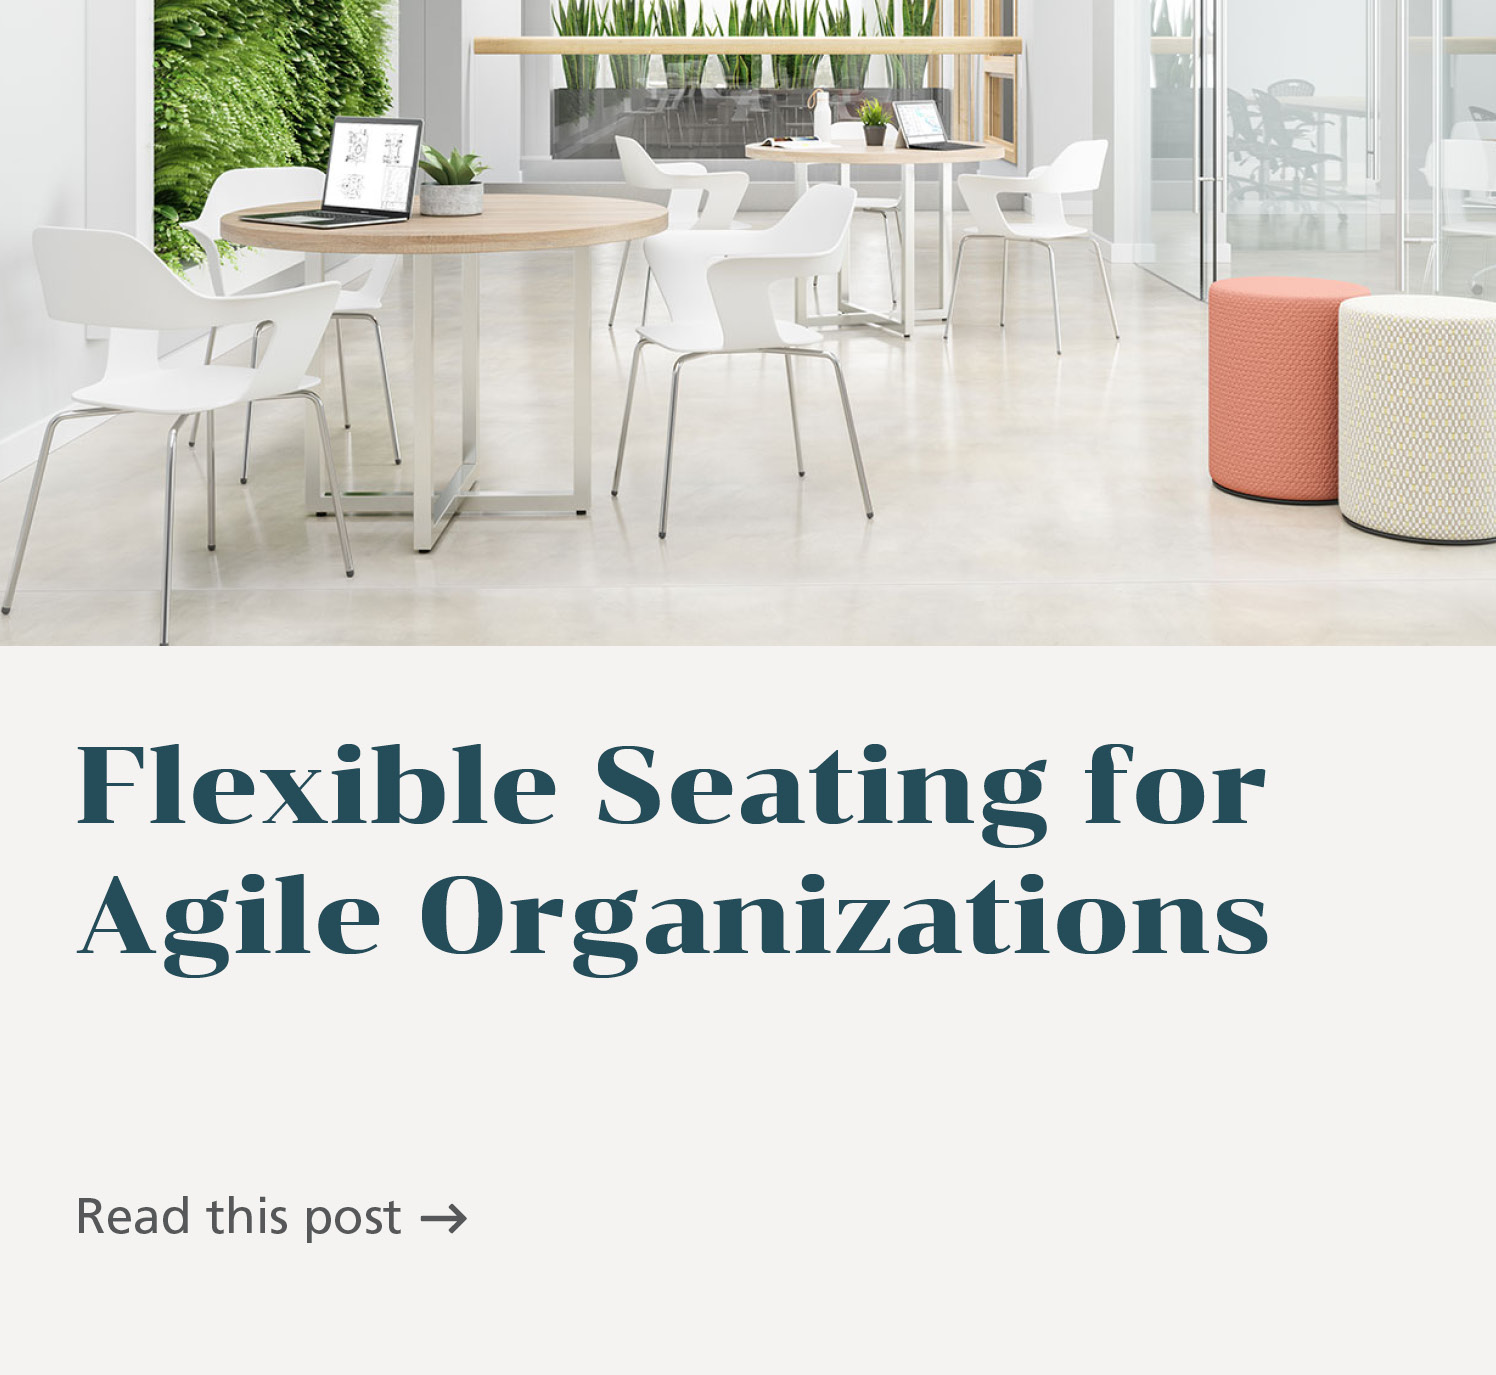 Flexible seating for agile organizations.